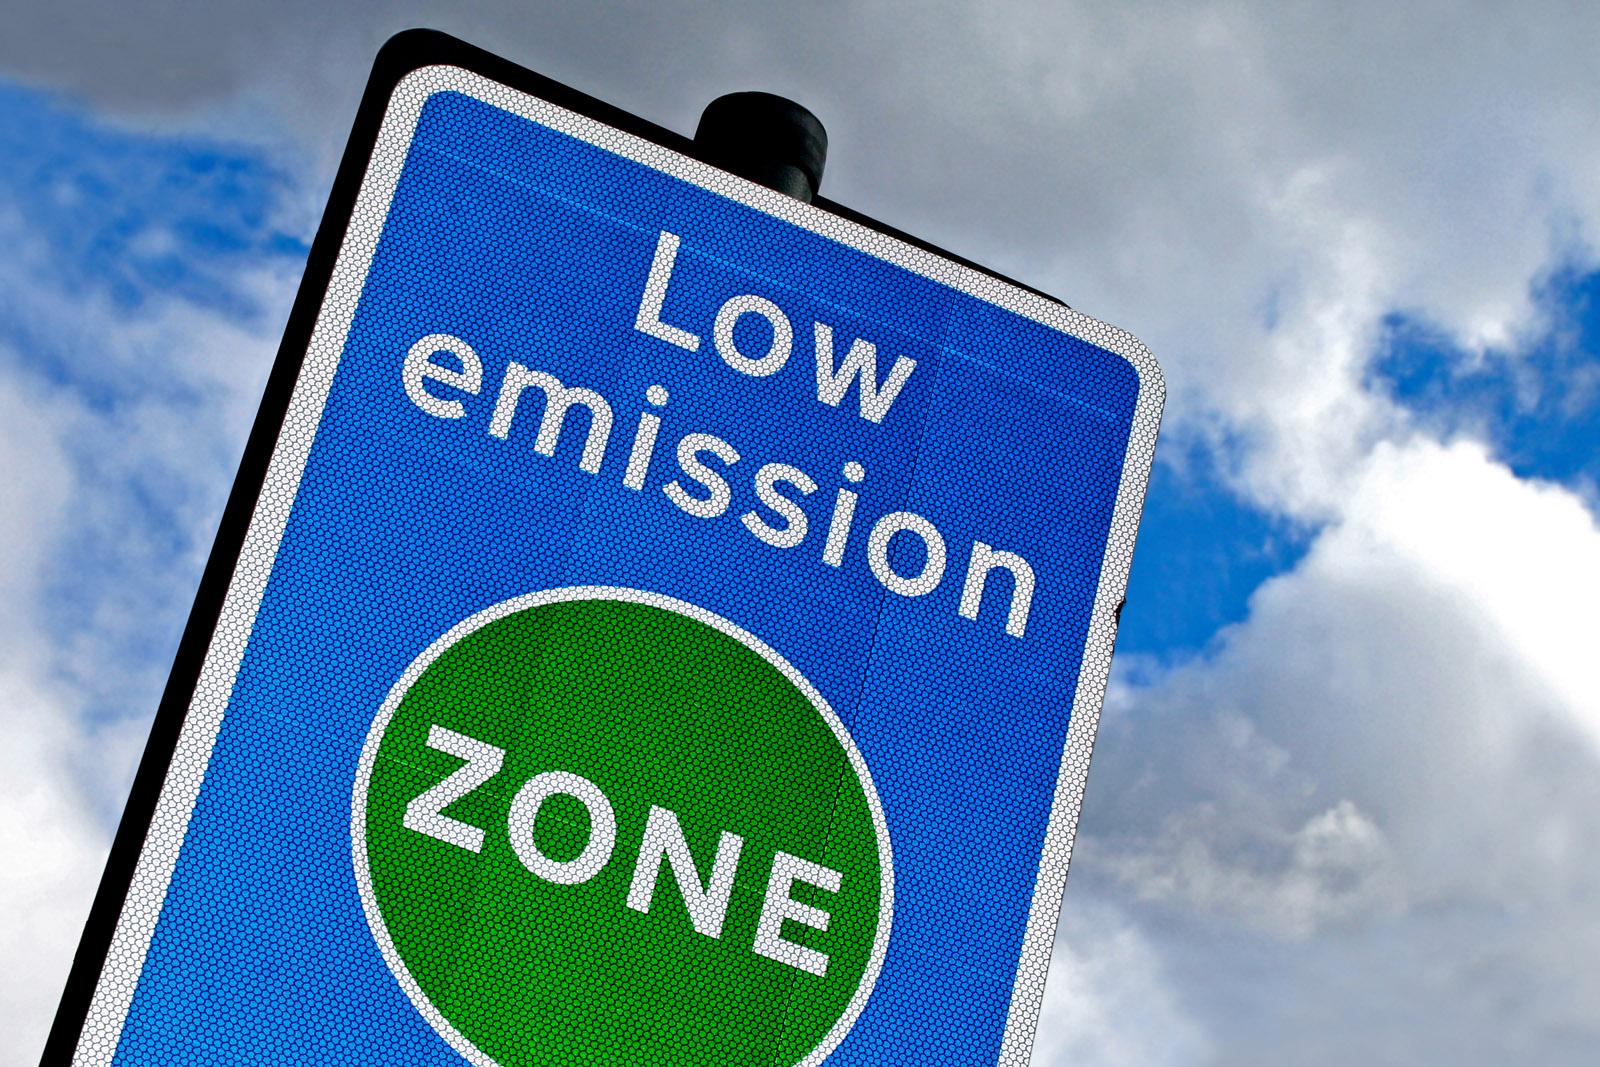 a low emission zone road sign